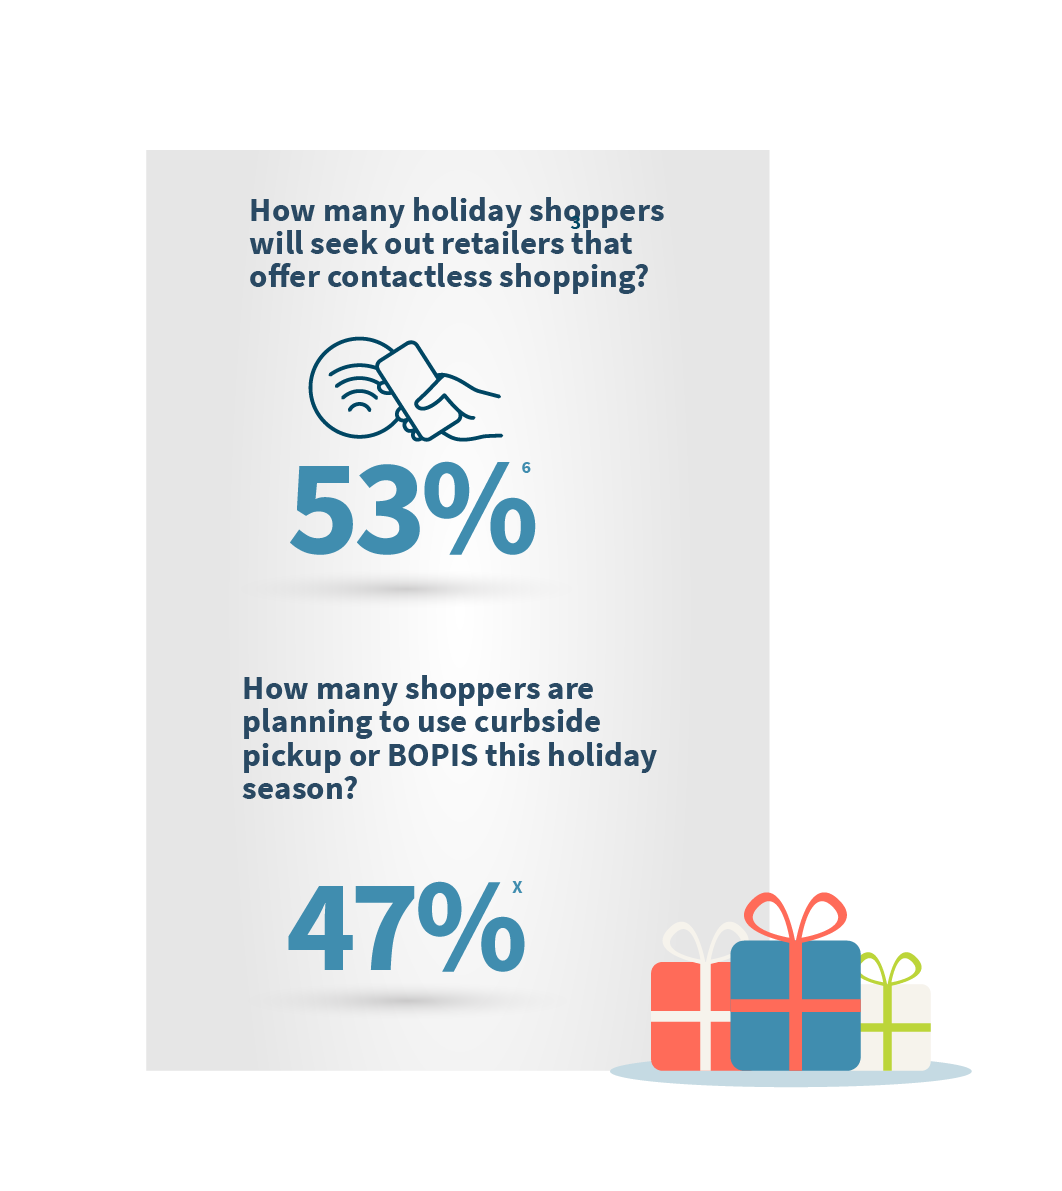 Placing an emphasis on contactless shopping methods will increase your customer base this year